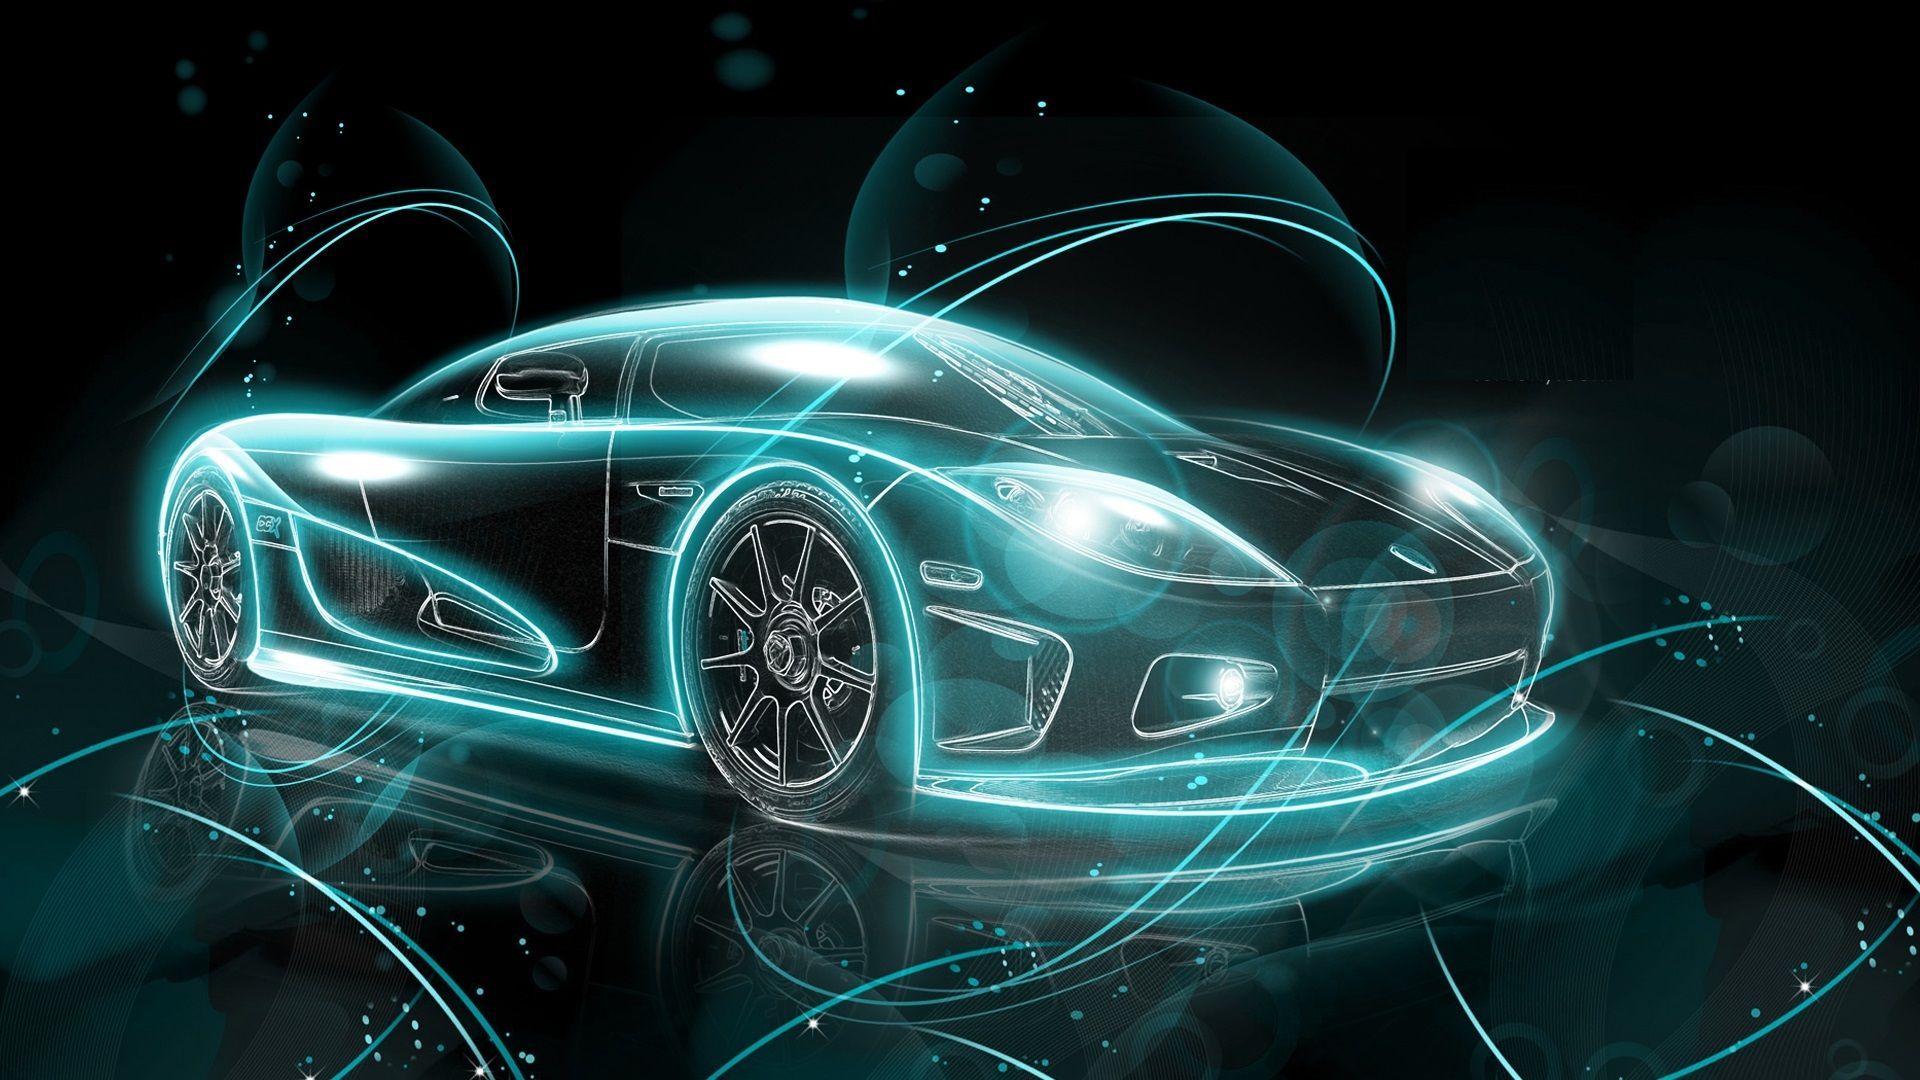 Abstract Cars Wallpaper Free Abstract Cars Background